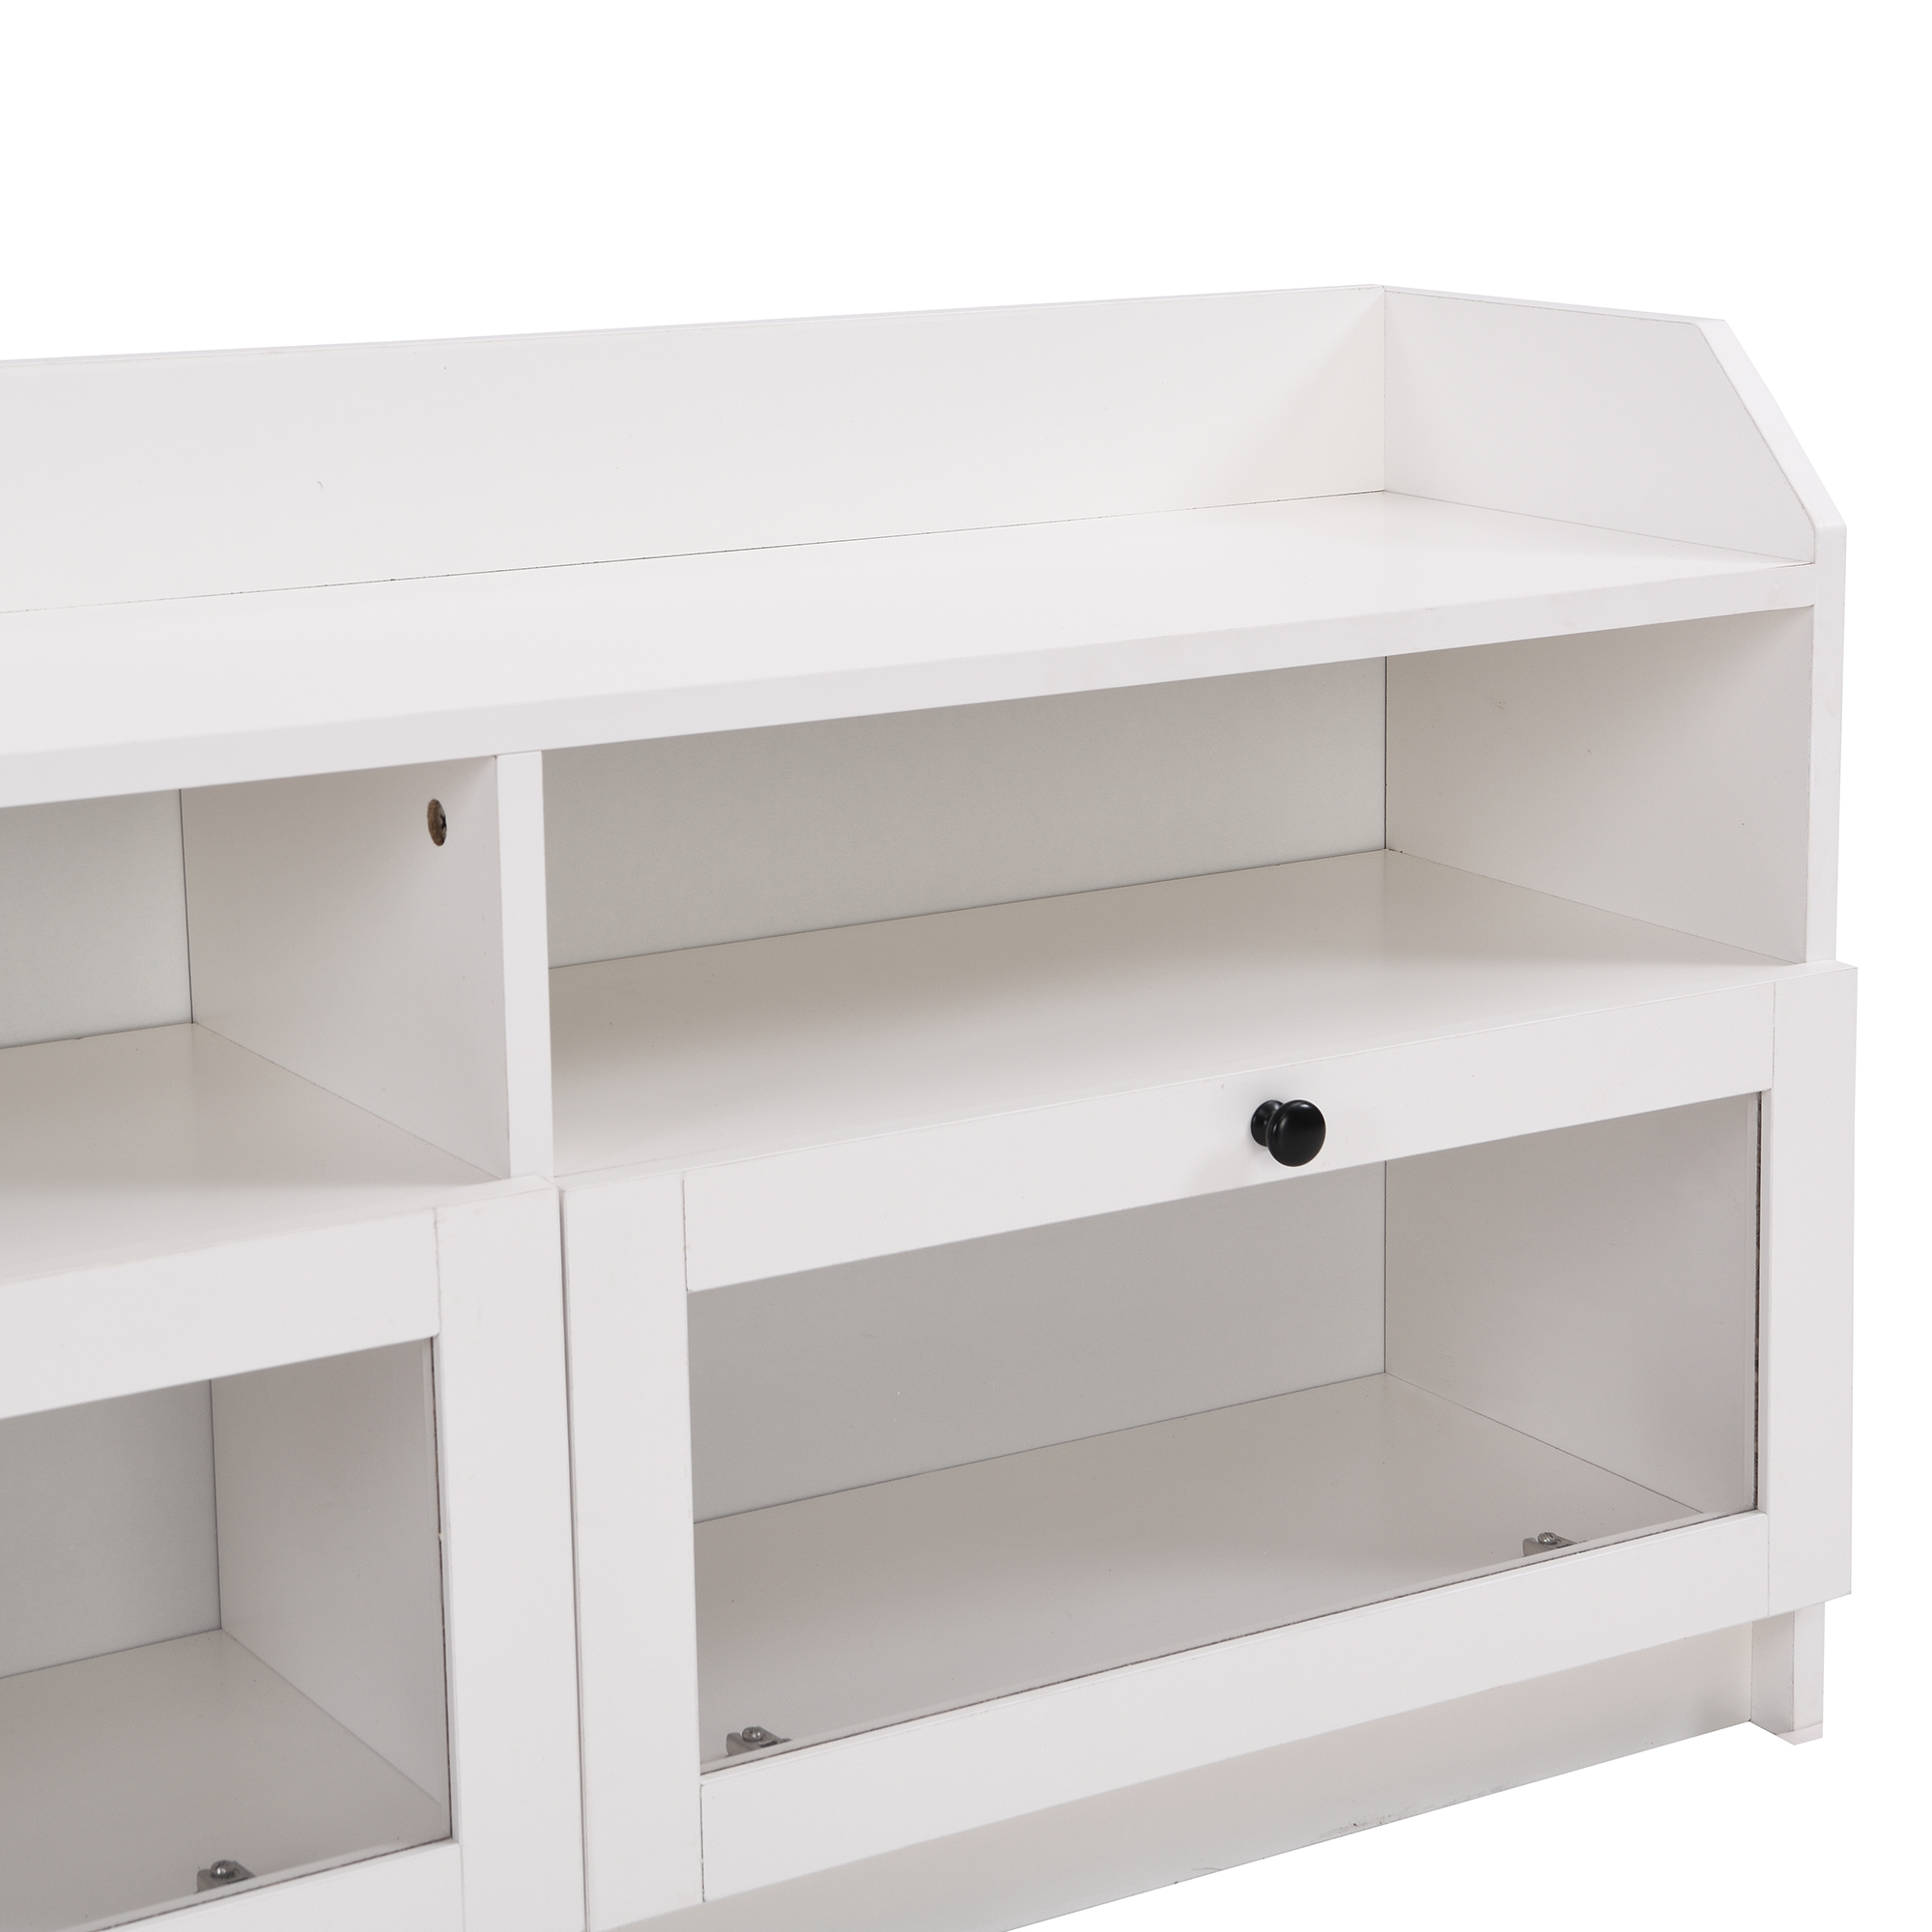 Chic Elegant Entertainment Wall Unit with Tall Cabinets - SD000020AAK